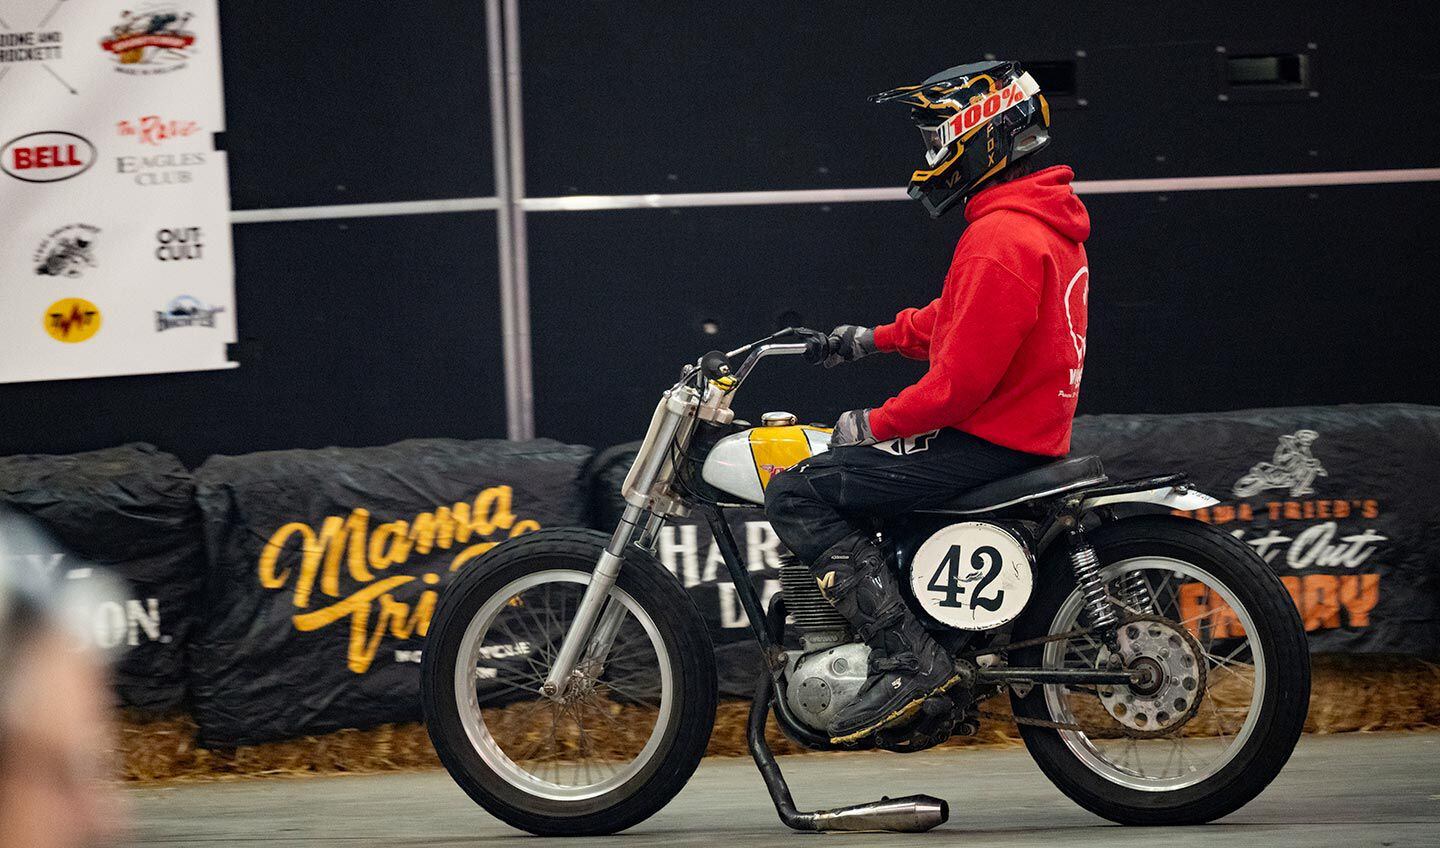 Where my zip-ties at? Donovan LeVan’s BSA puts power (and pipe) to pavement in the Vintage class, Flat Out Friday.